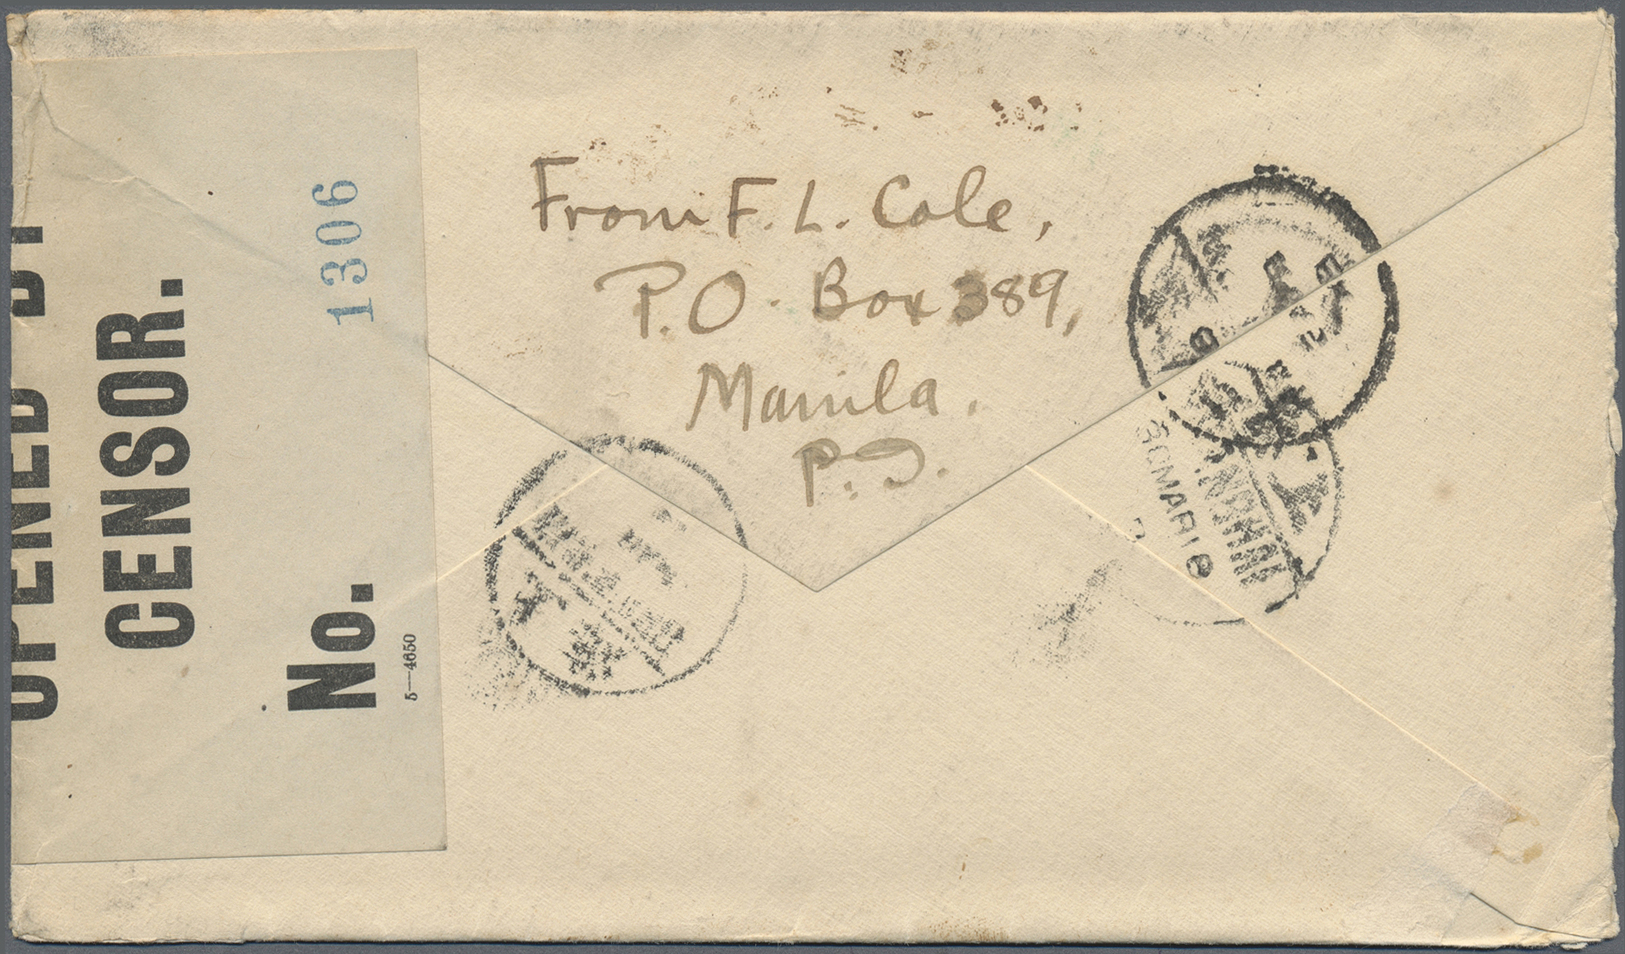 Br Philippinen: 1918. Censored Envelope Addressed To Hankow, Hupeh Province, China Bearing Philippines SG 287, 10c Blue - Philippines